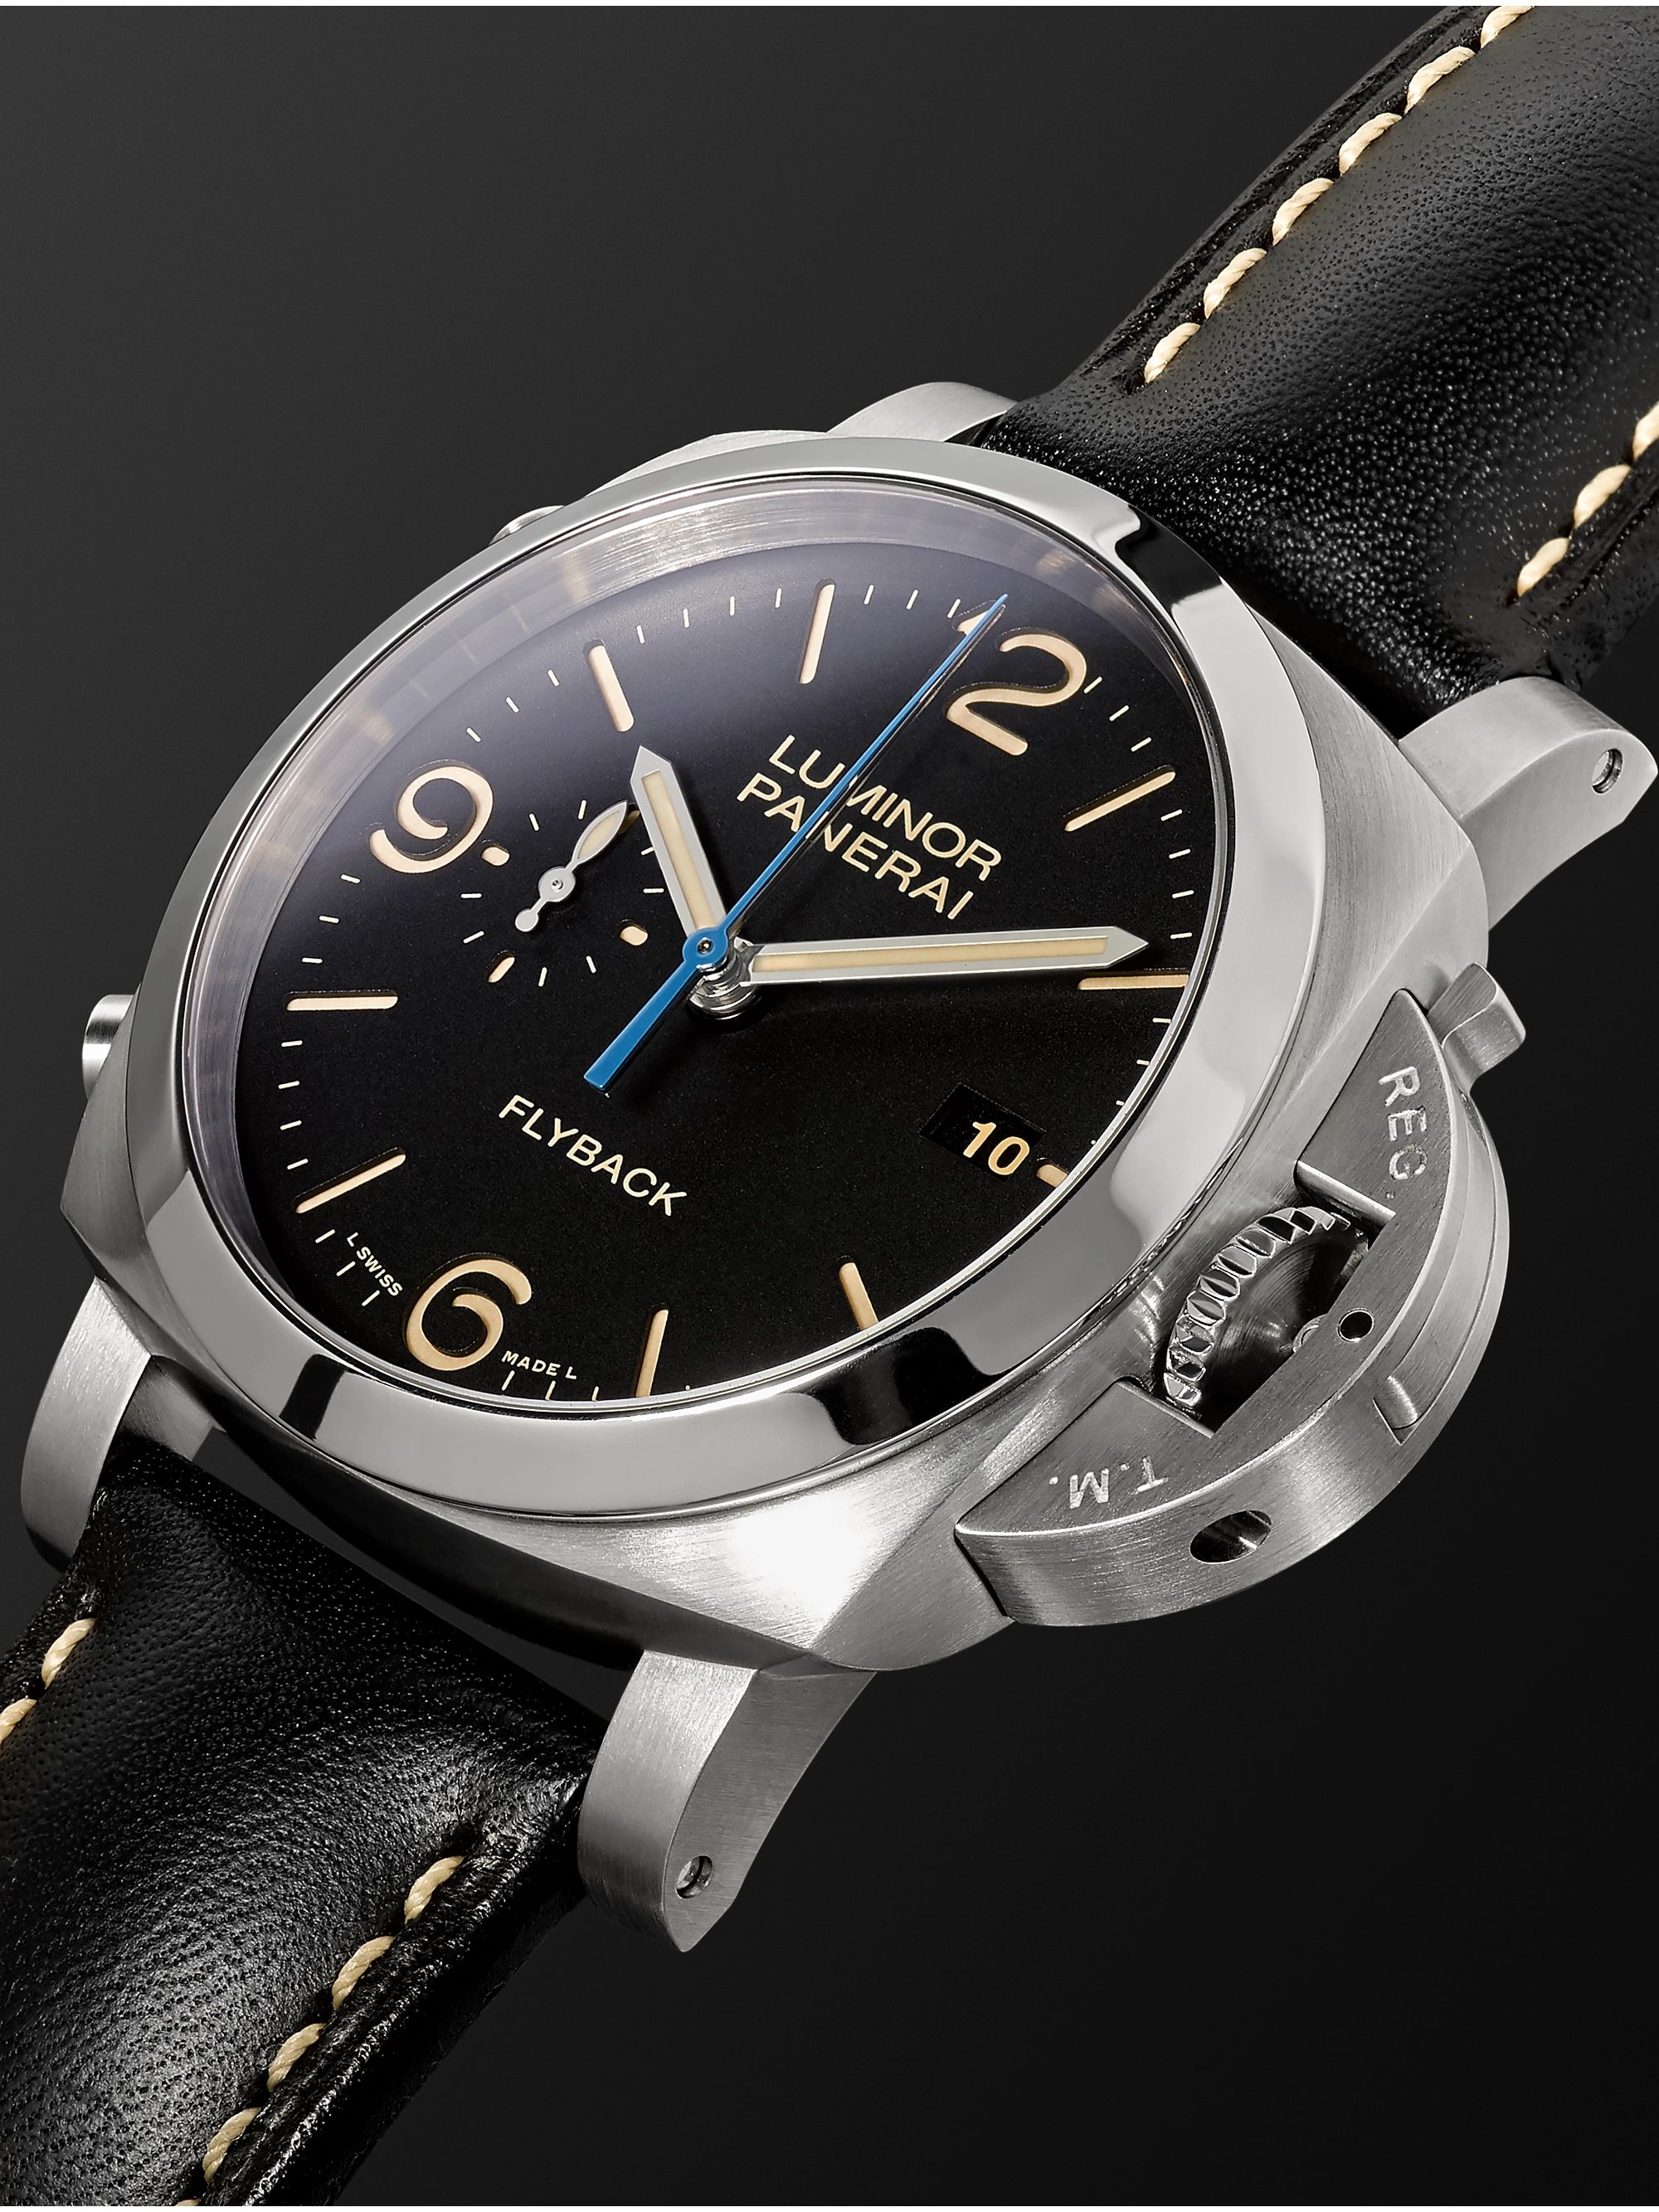 PANERAI Luminor Chrono Automatic Flyback Chronograph 44mm Stainless Steel and Leather Watch, Ref. No. PAM00524